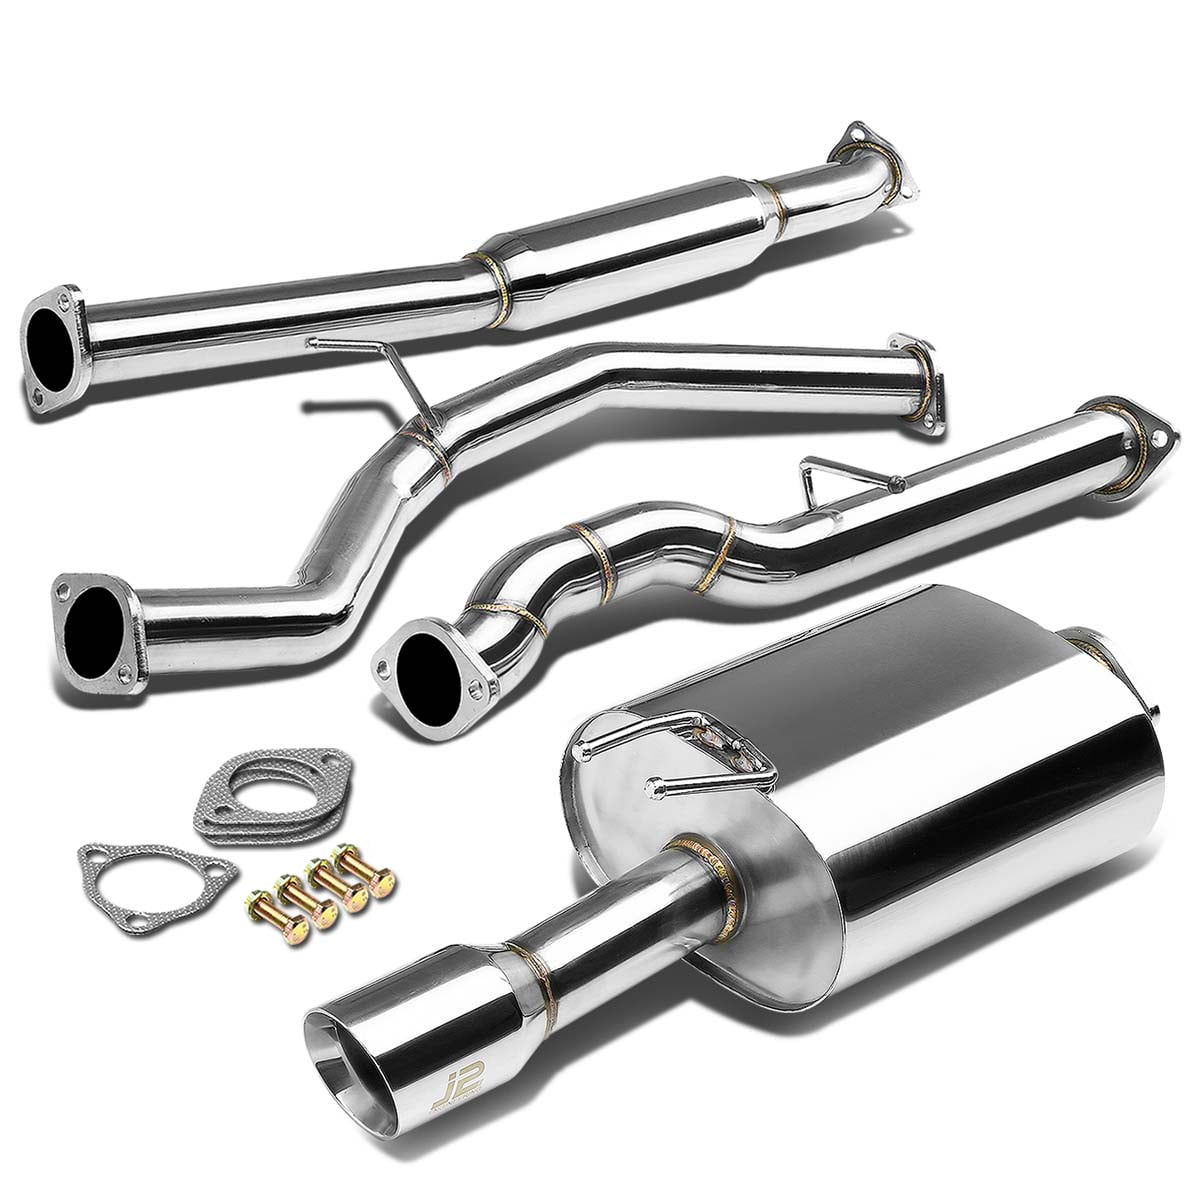 Details about   J2 Engineering Performance Catback Muffler Catback Exhaust for 06-09 Eclipse 2.4